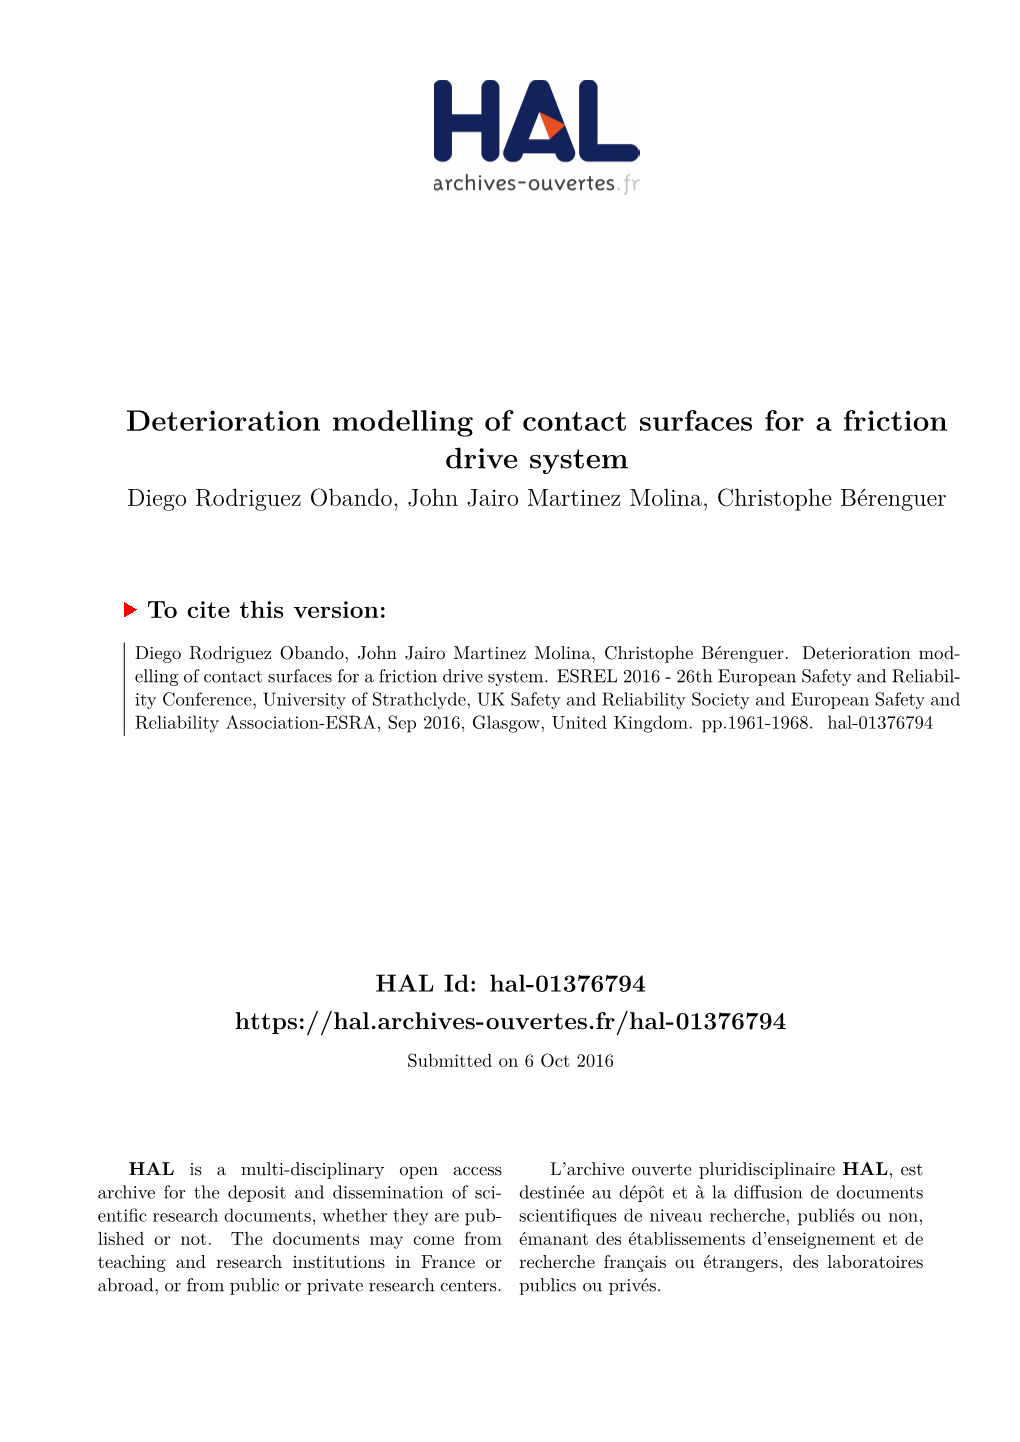 Deterioration Modelling of Contact Surfaces for a Friction Drive System Diego Rodriguez Obando, John Jairo Martinez Molina, Christophe Bérenguer